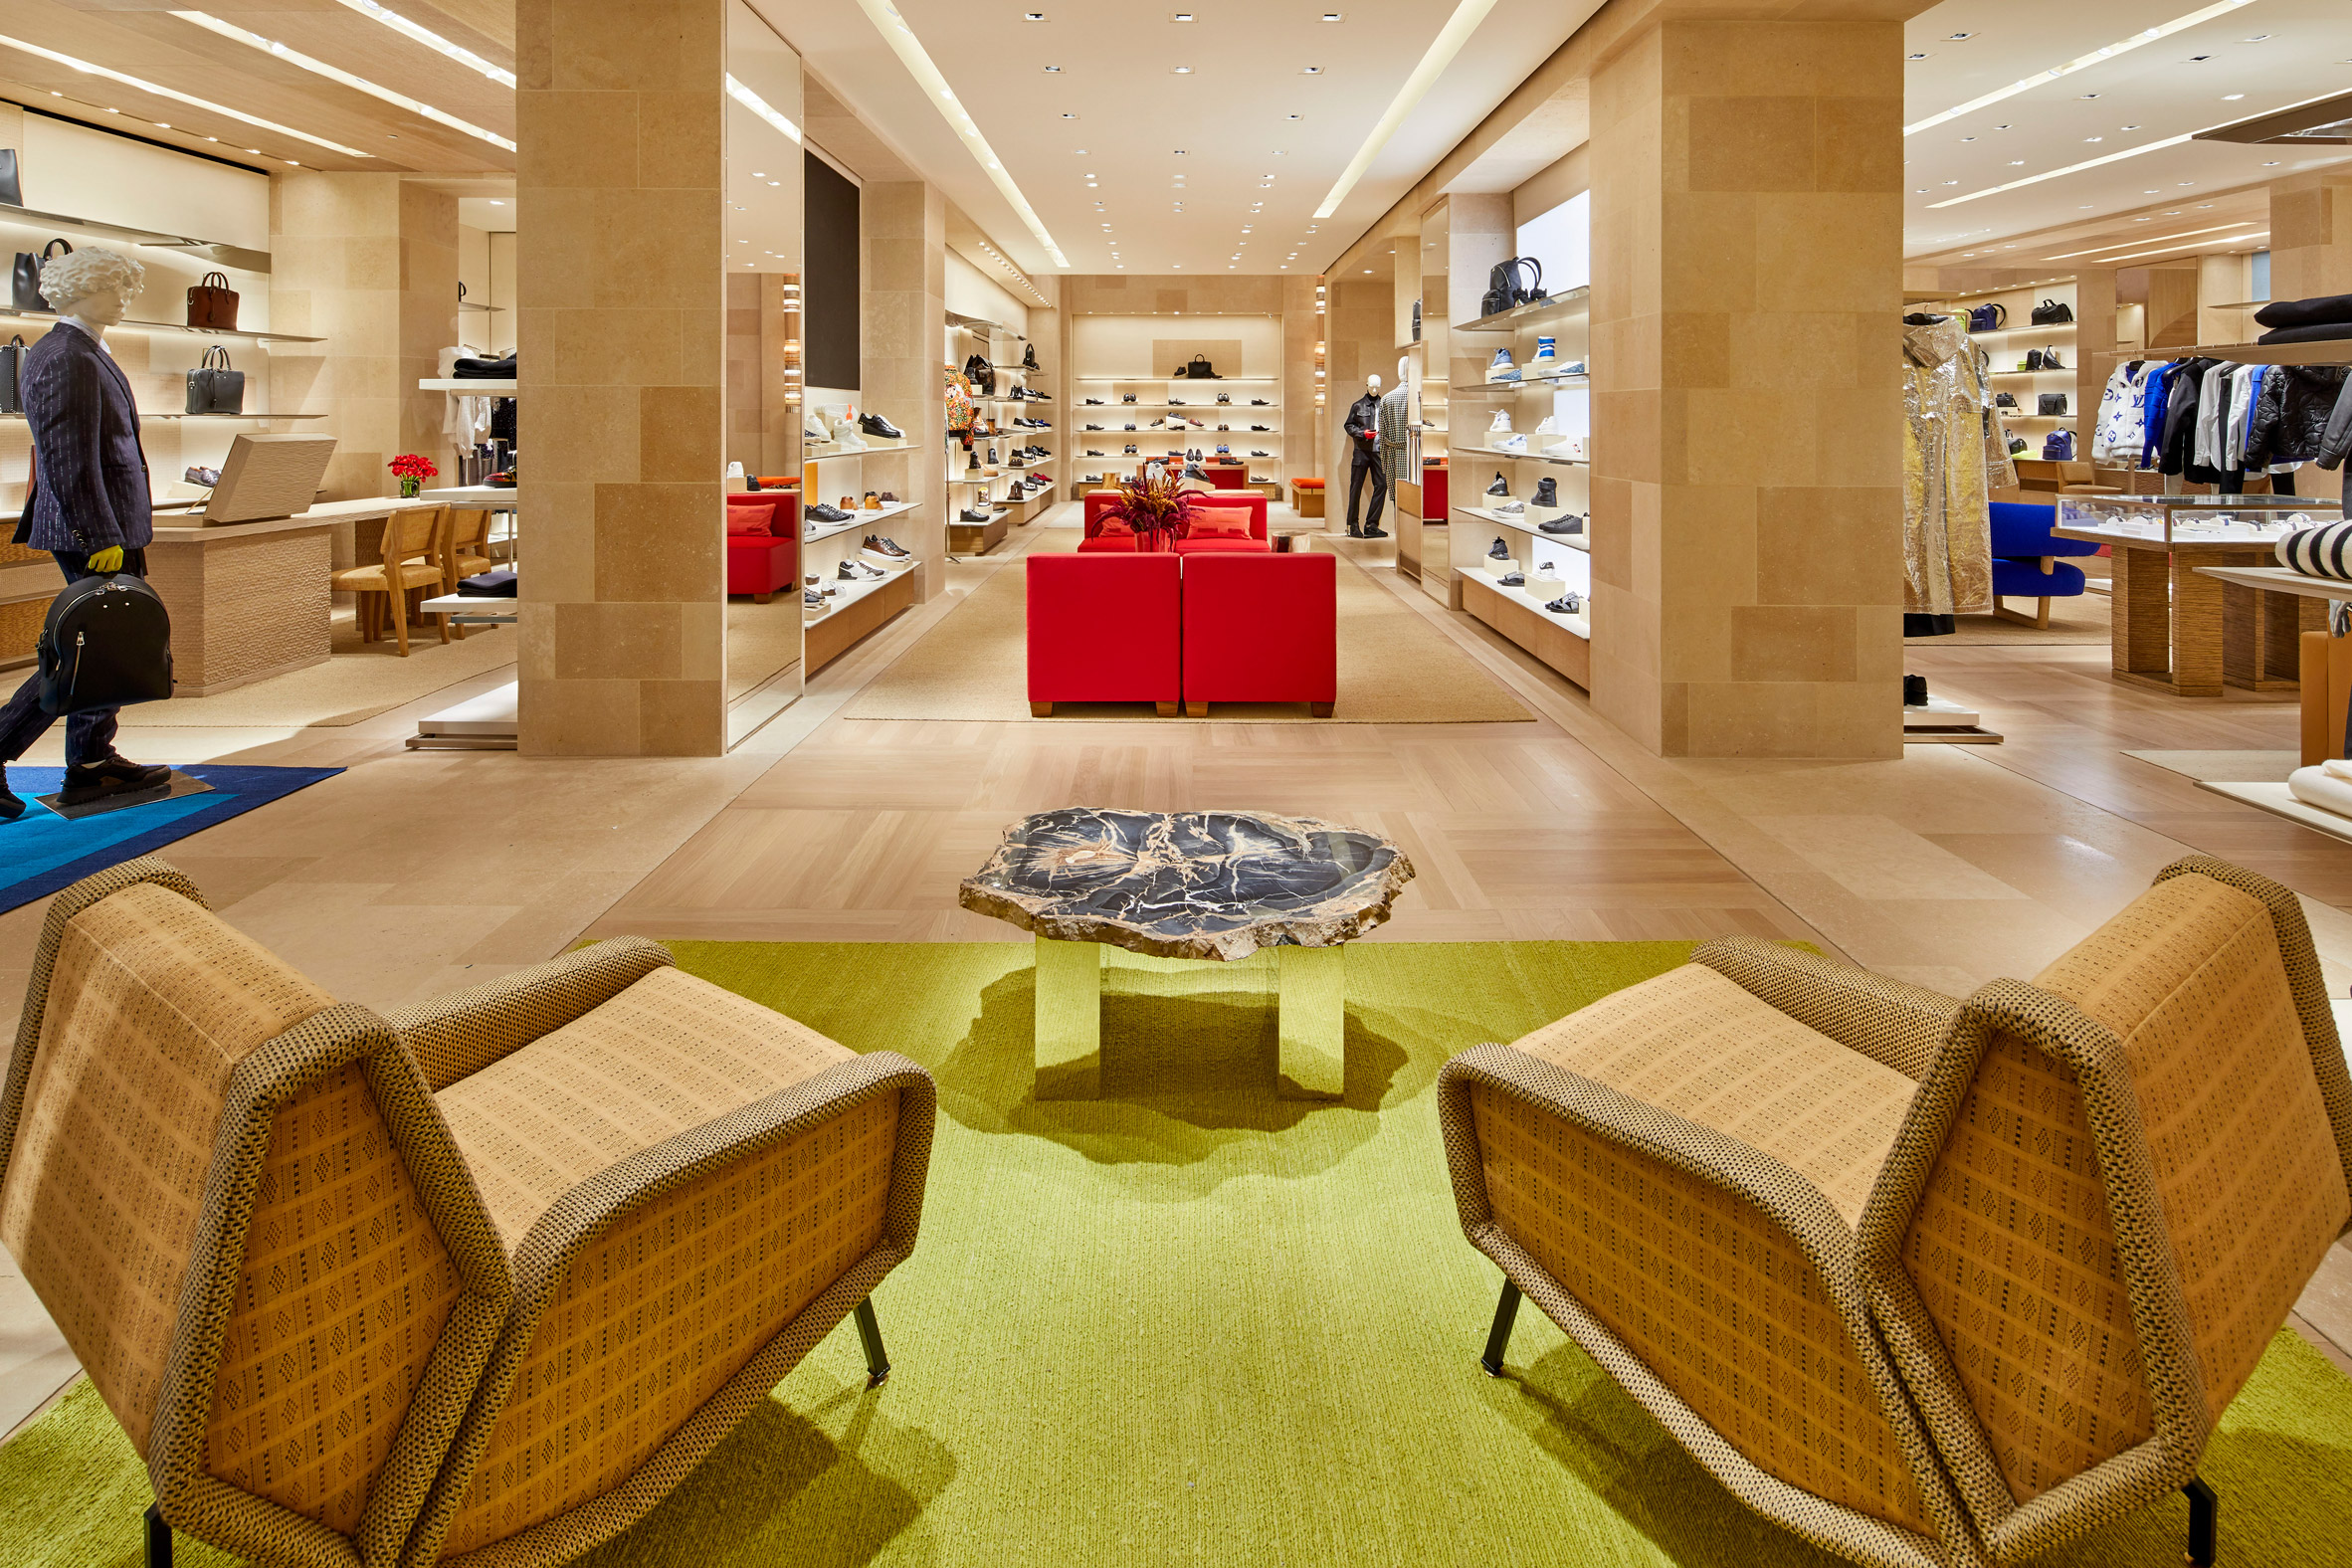 Louis Vitton flagship shop with lime carpet, sofas and products